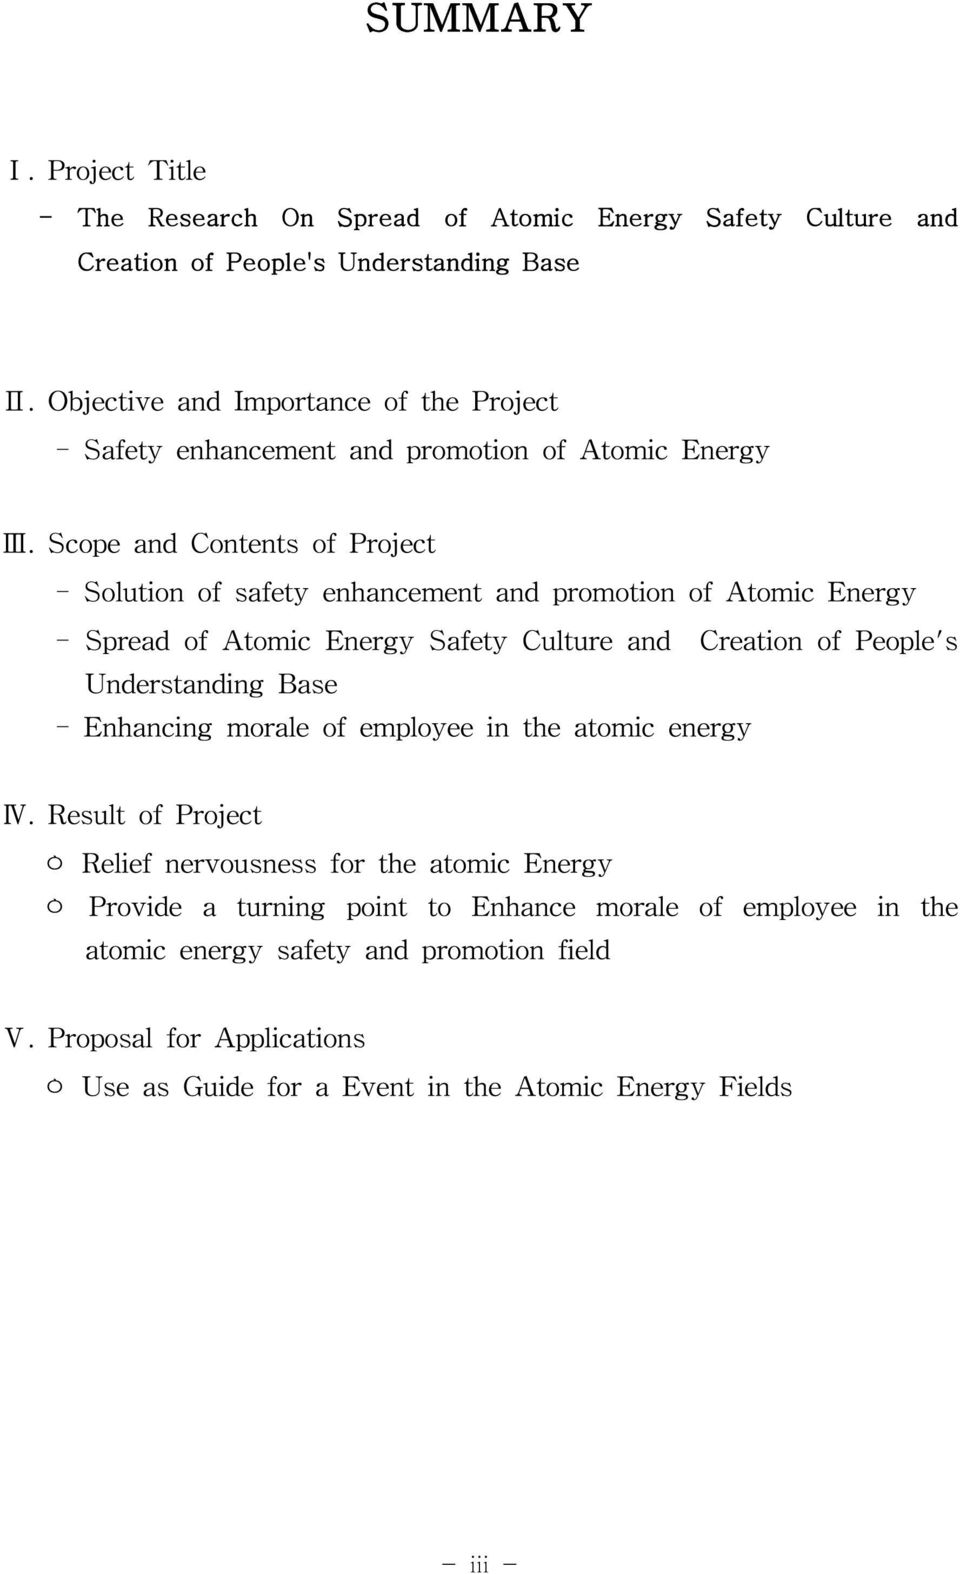 Scope and Contents of Project - Solution of safety enhancement and promotion of Atomic Energy - Spread of Atomic Energy Safety Culture and Creation of People's Understanding Base